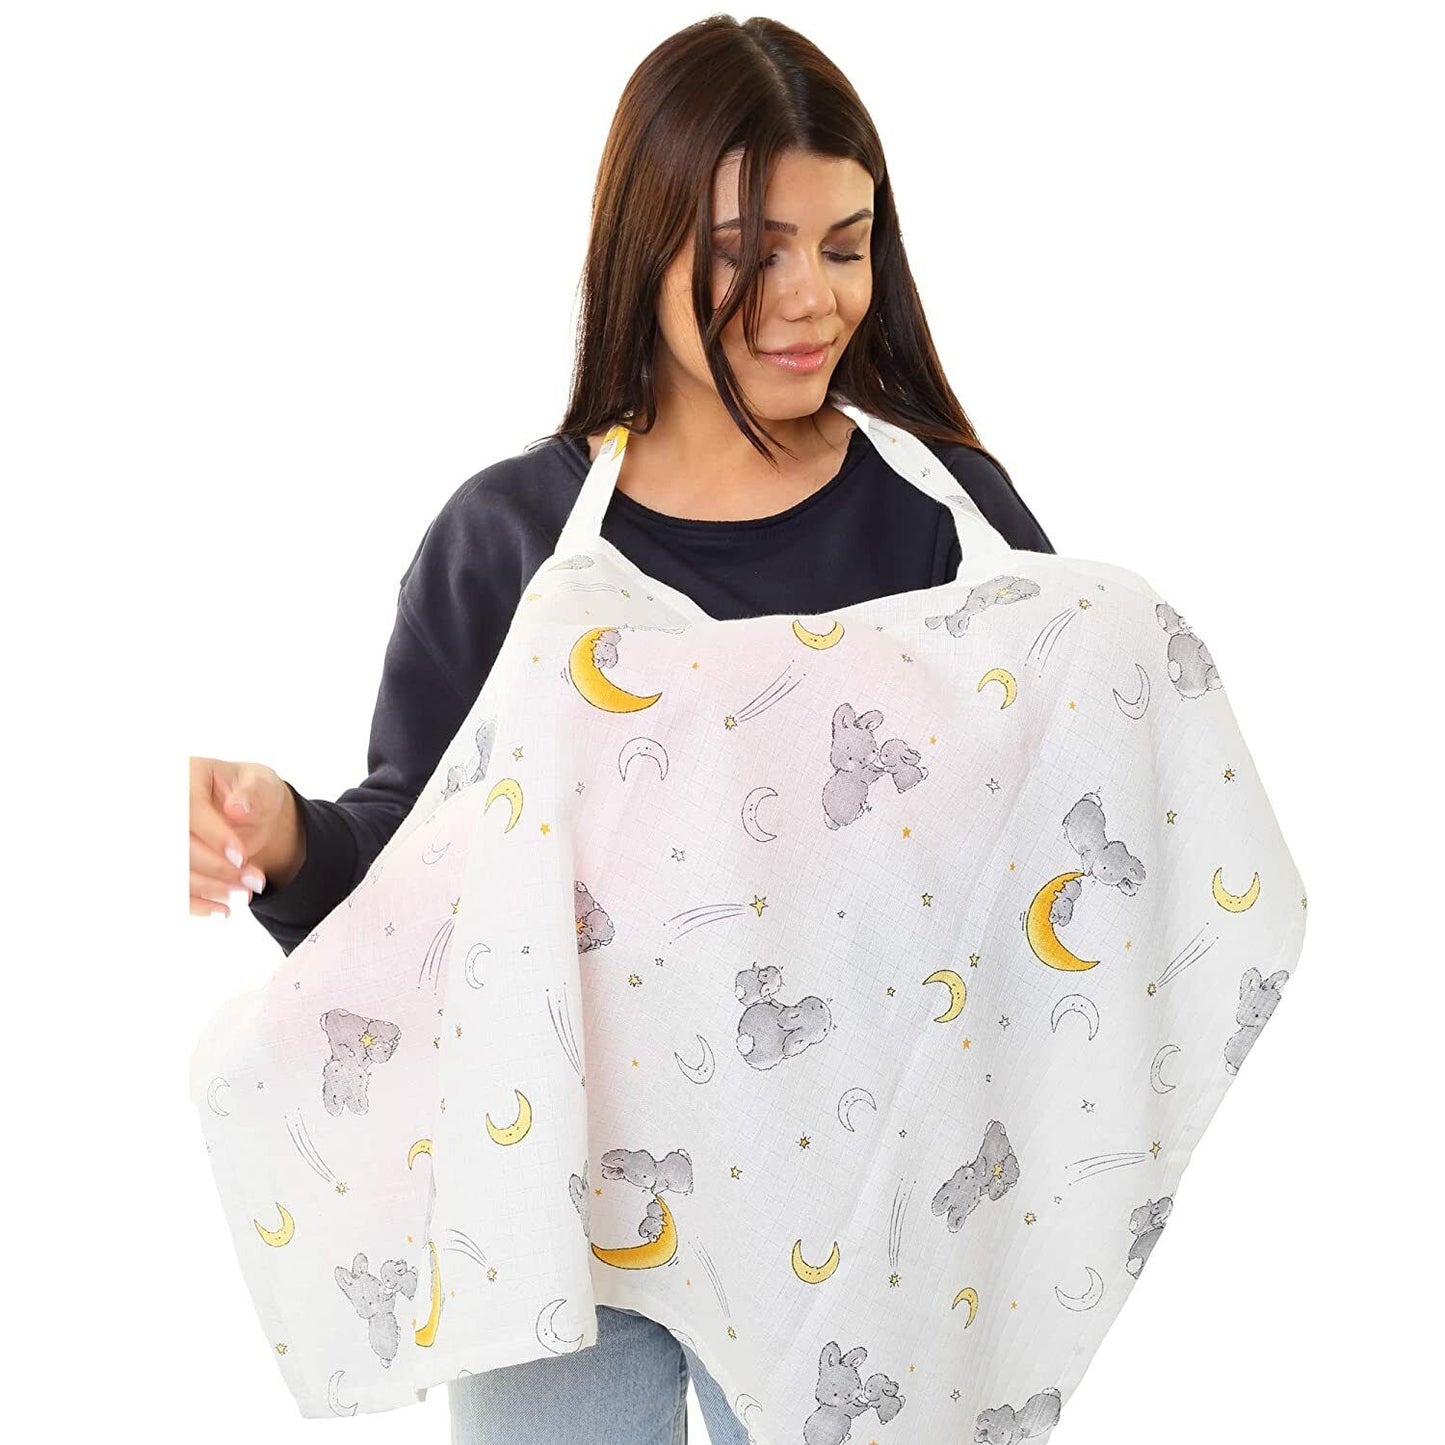 Nursing Cover for Breastfeeding, Muslin Cloth Fabric Material Soft, Apron Style